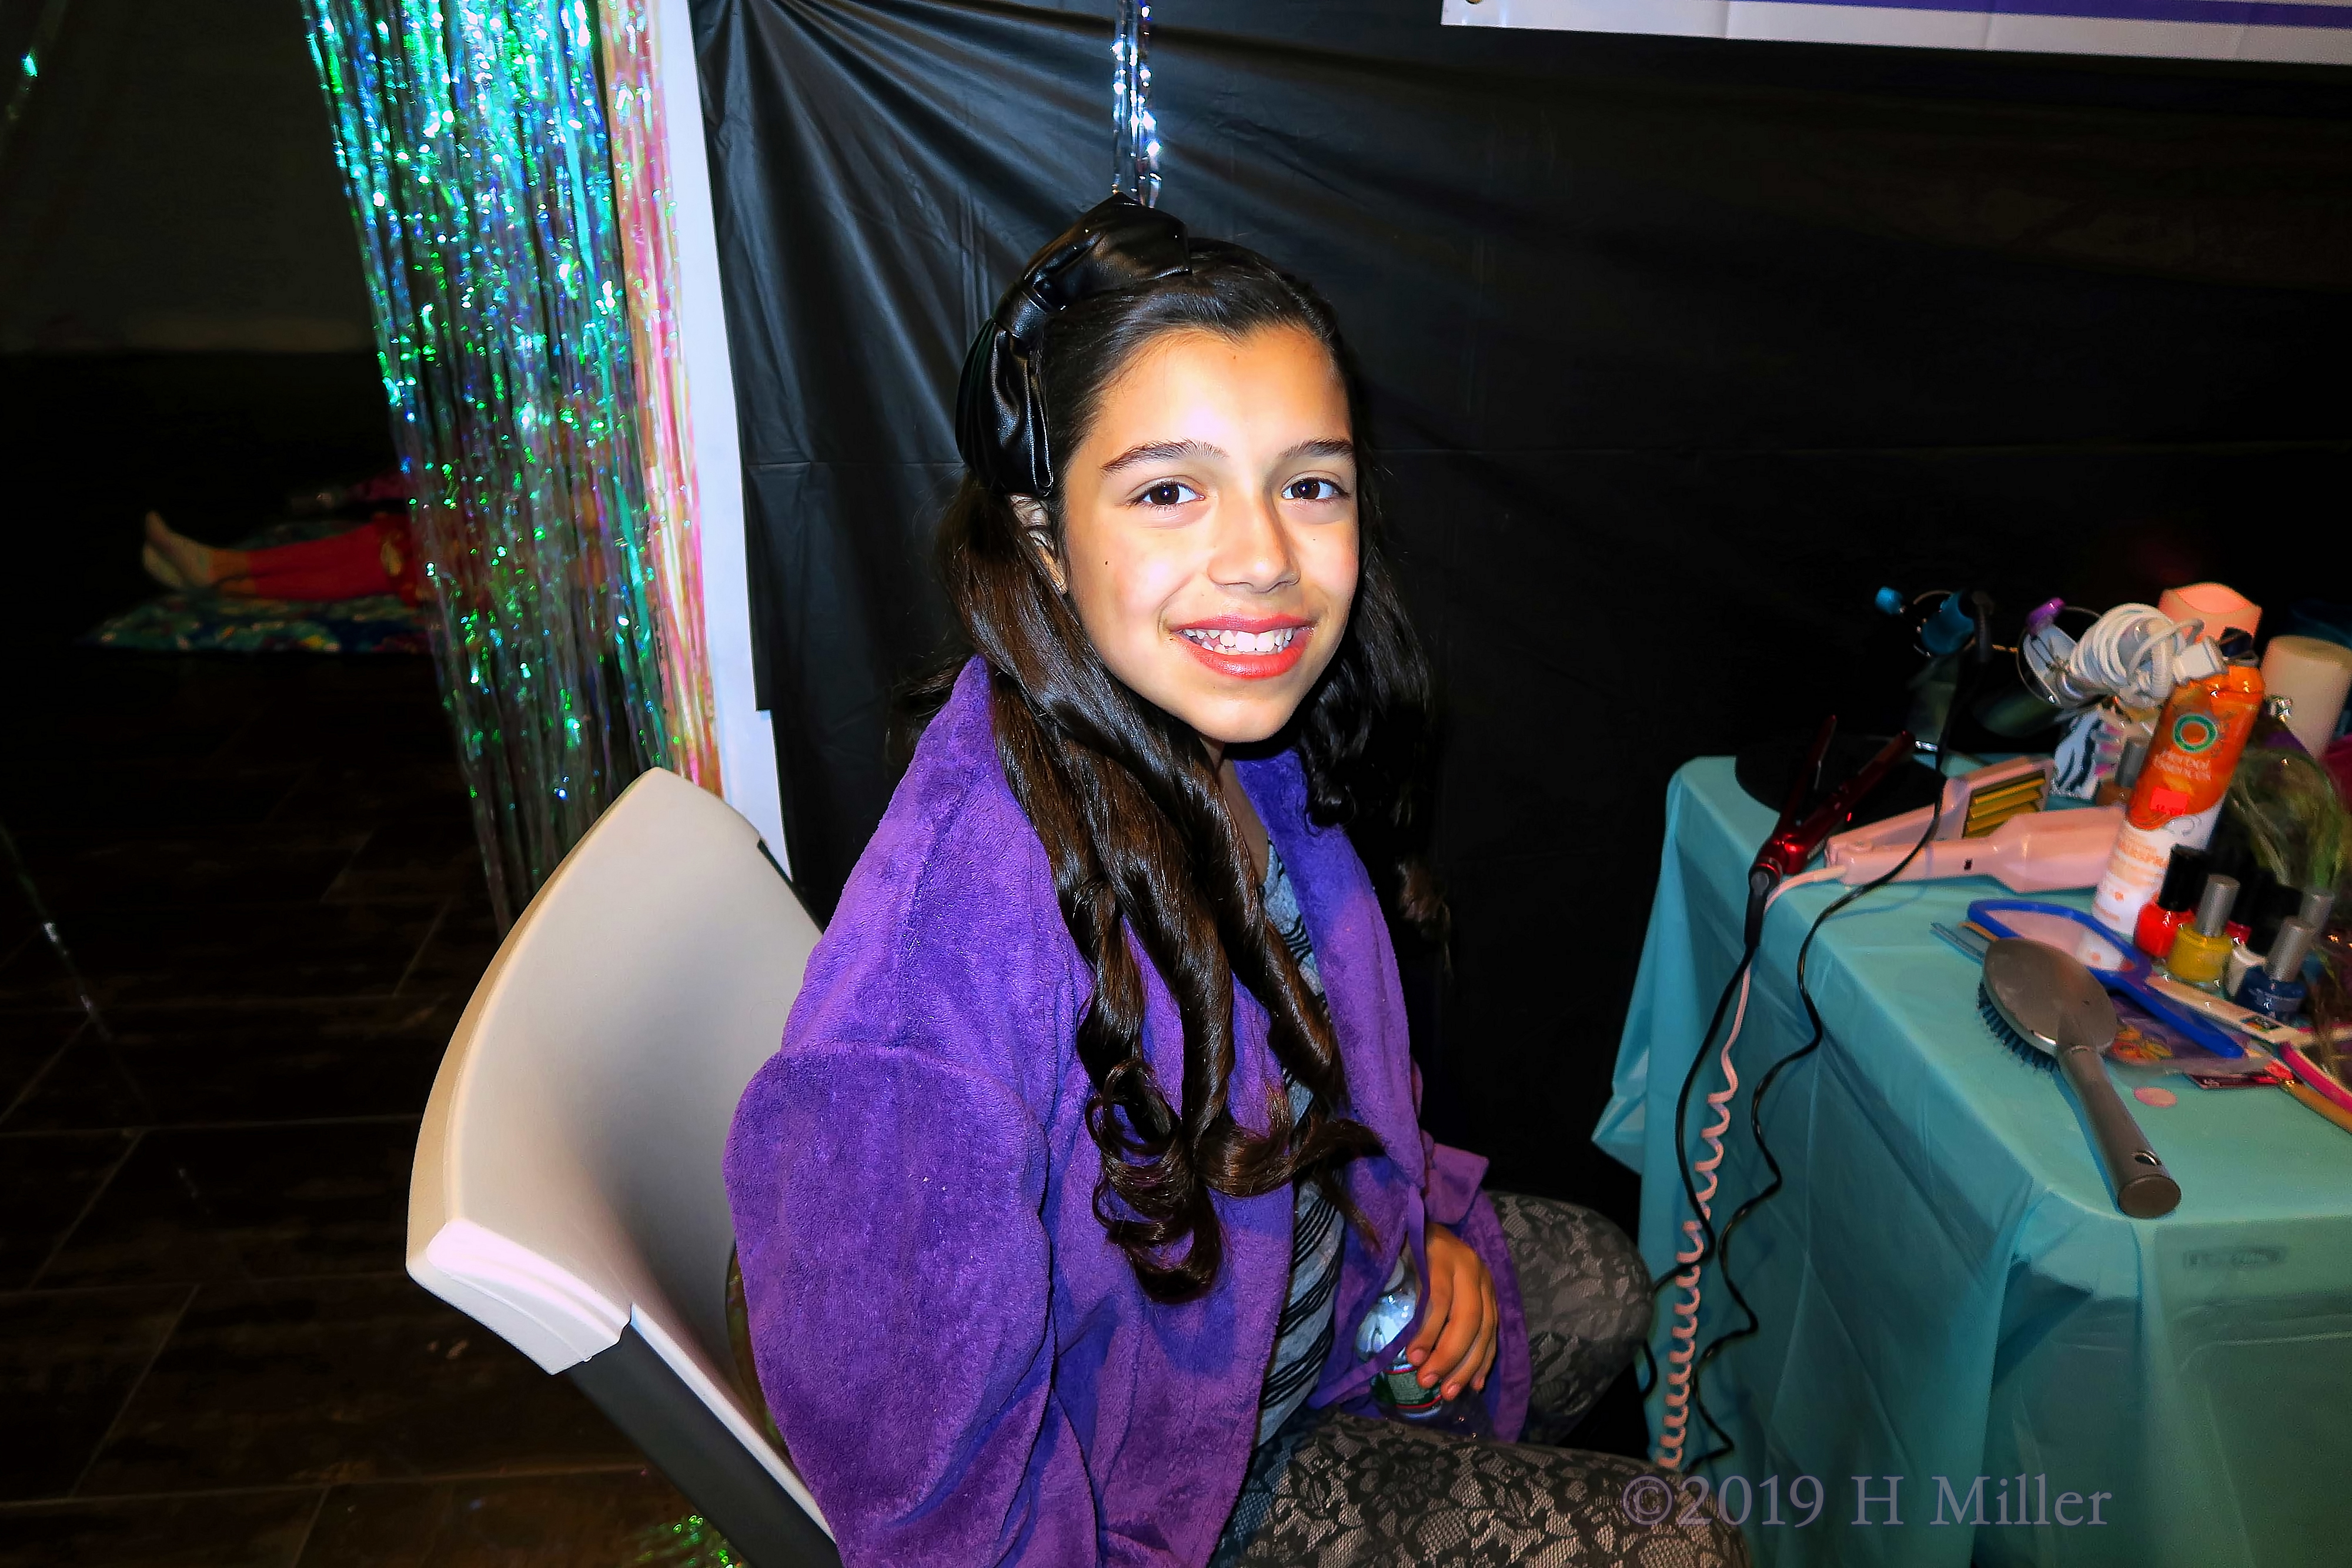 Curls And Bows! Kids Hairstyle On This Party Guest At The Spa Party For Girls! 4